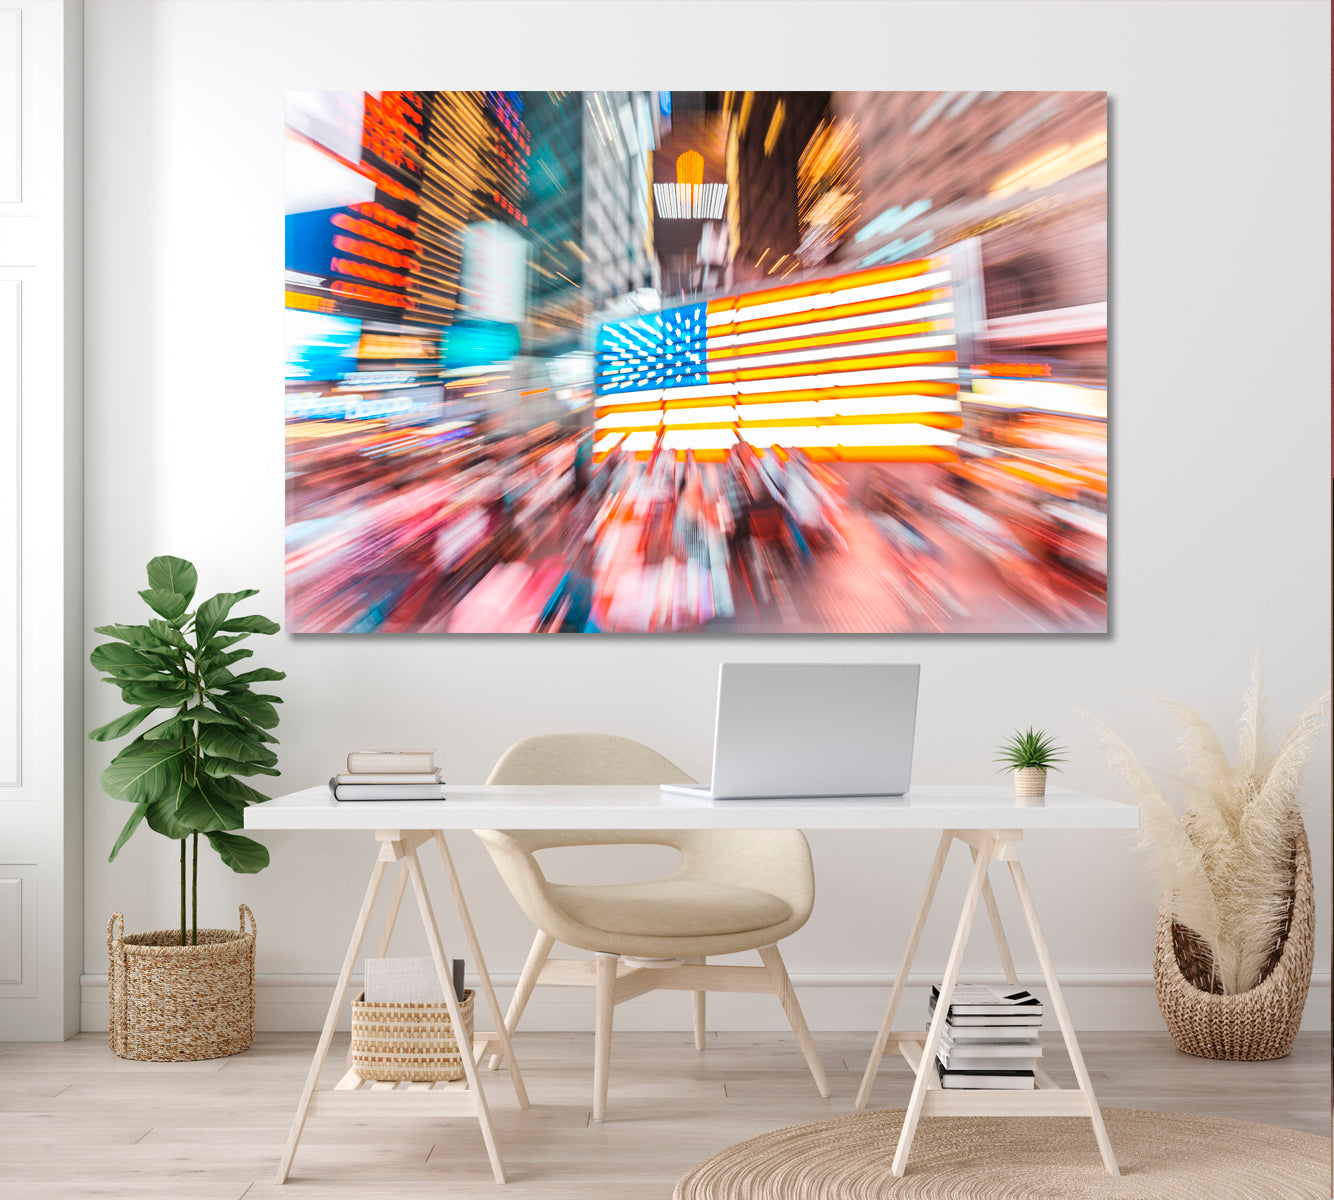 Blurred Background of New York Street with American Flag Canvas Print-Canvas Print-CetArt-1 Panel-24x16 inches-CetArt